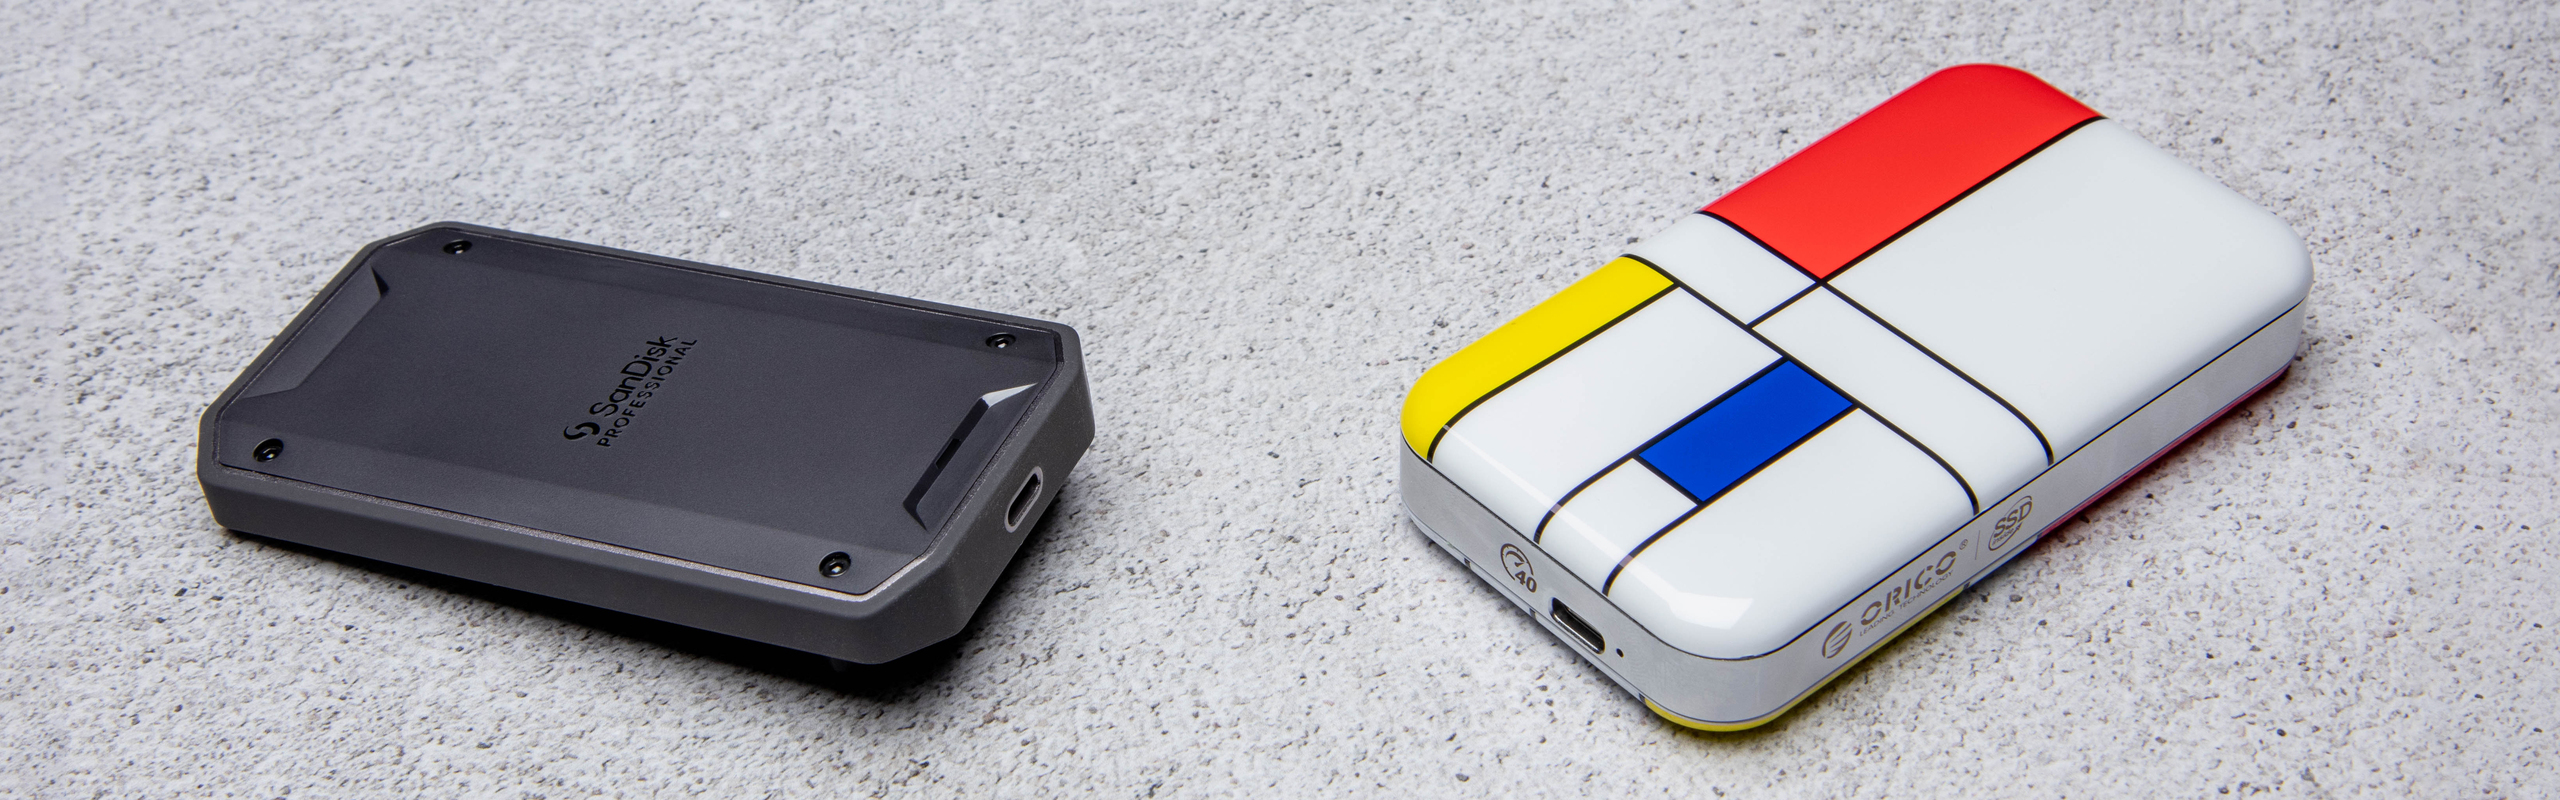 The First USB4 External Hard Drives - Do They Have a Future?